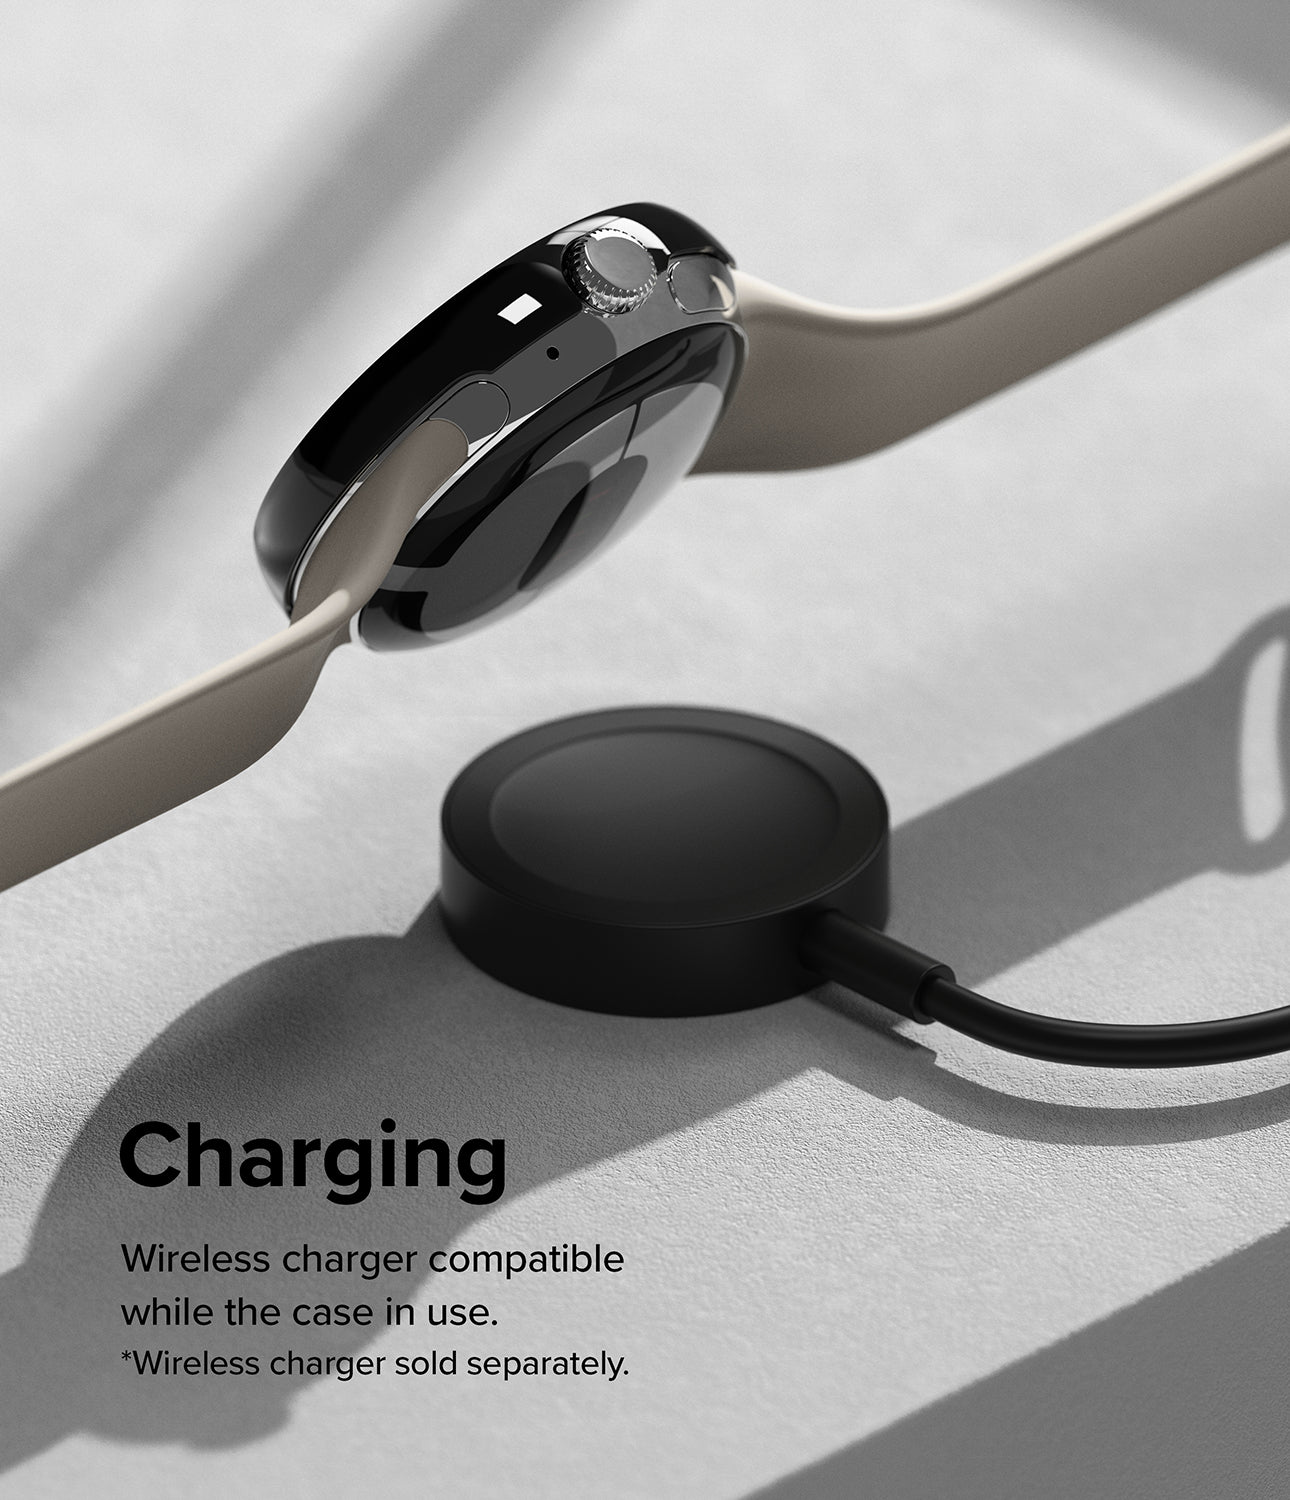 Charging - Wireless charger compatible while the case in use. *Wireless charger sold separately.